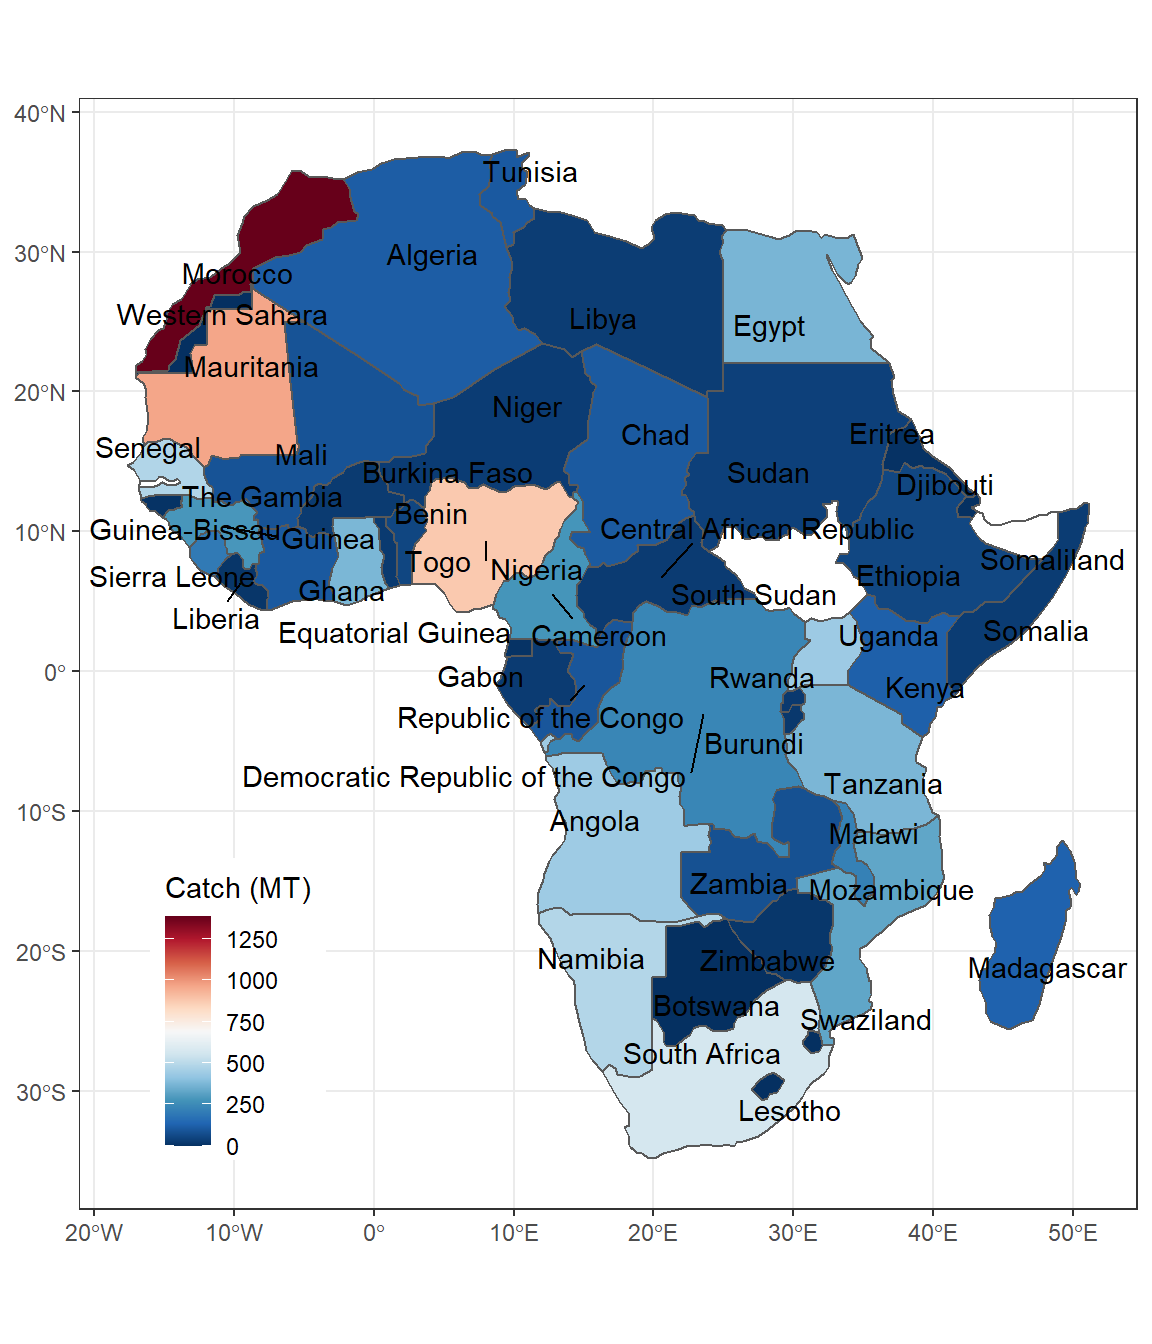 A static Choropleth representation of African spatial distribution of capture fisheries reported to FAO in 2018